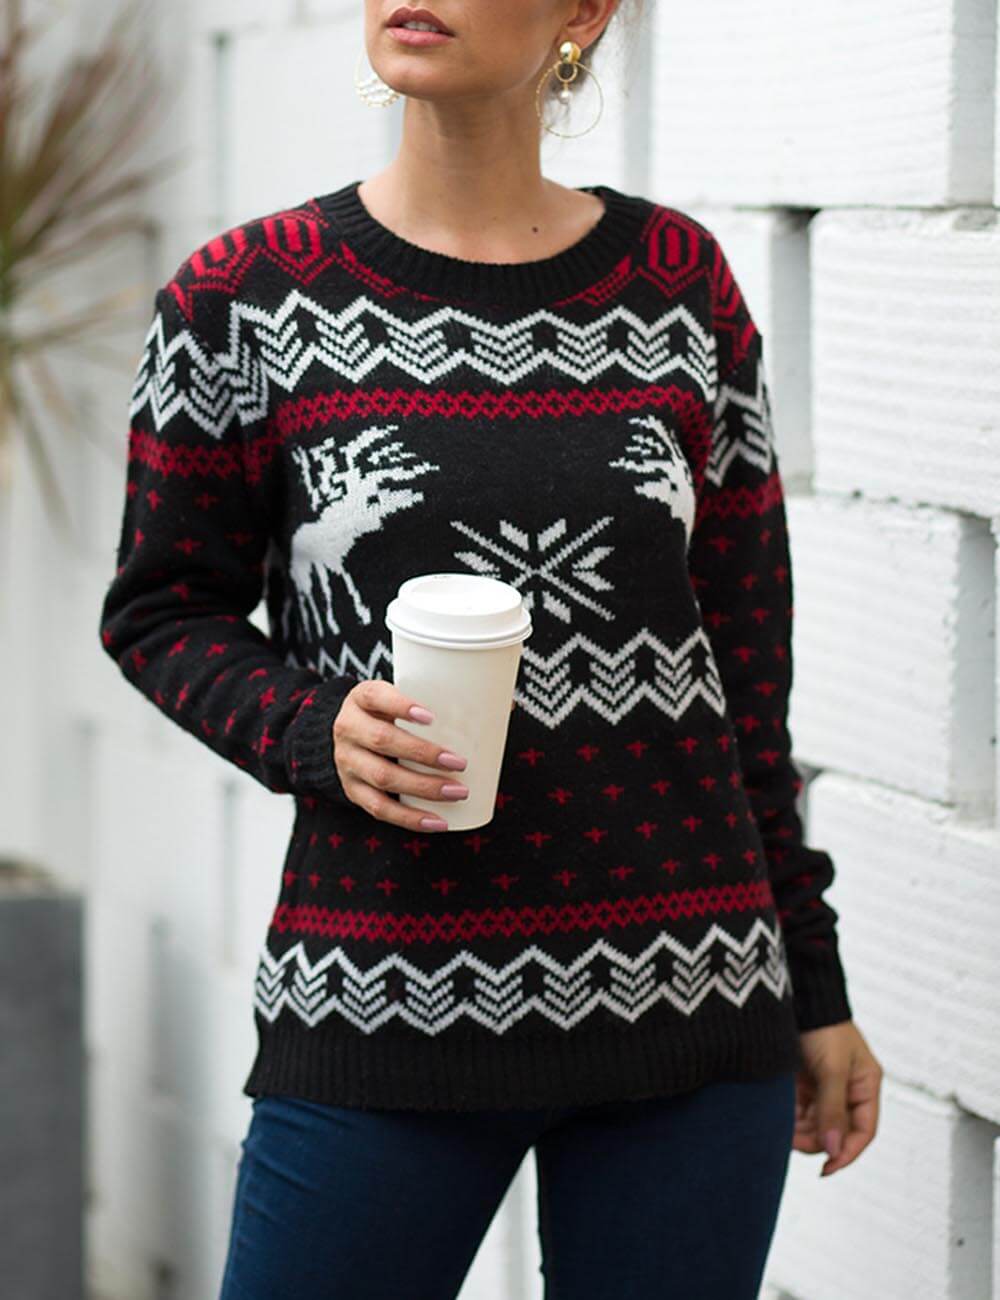  Women's Stylish Christmas Reindeer Sweater Round Neck Long Sleeve Loose Knit Pullover Cardigan Jumper